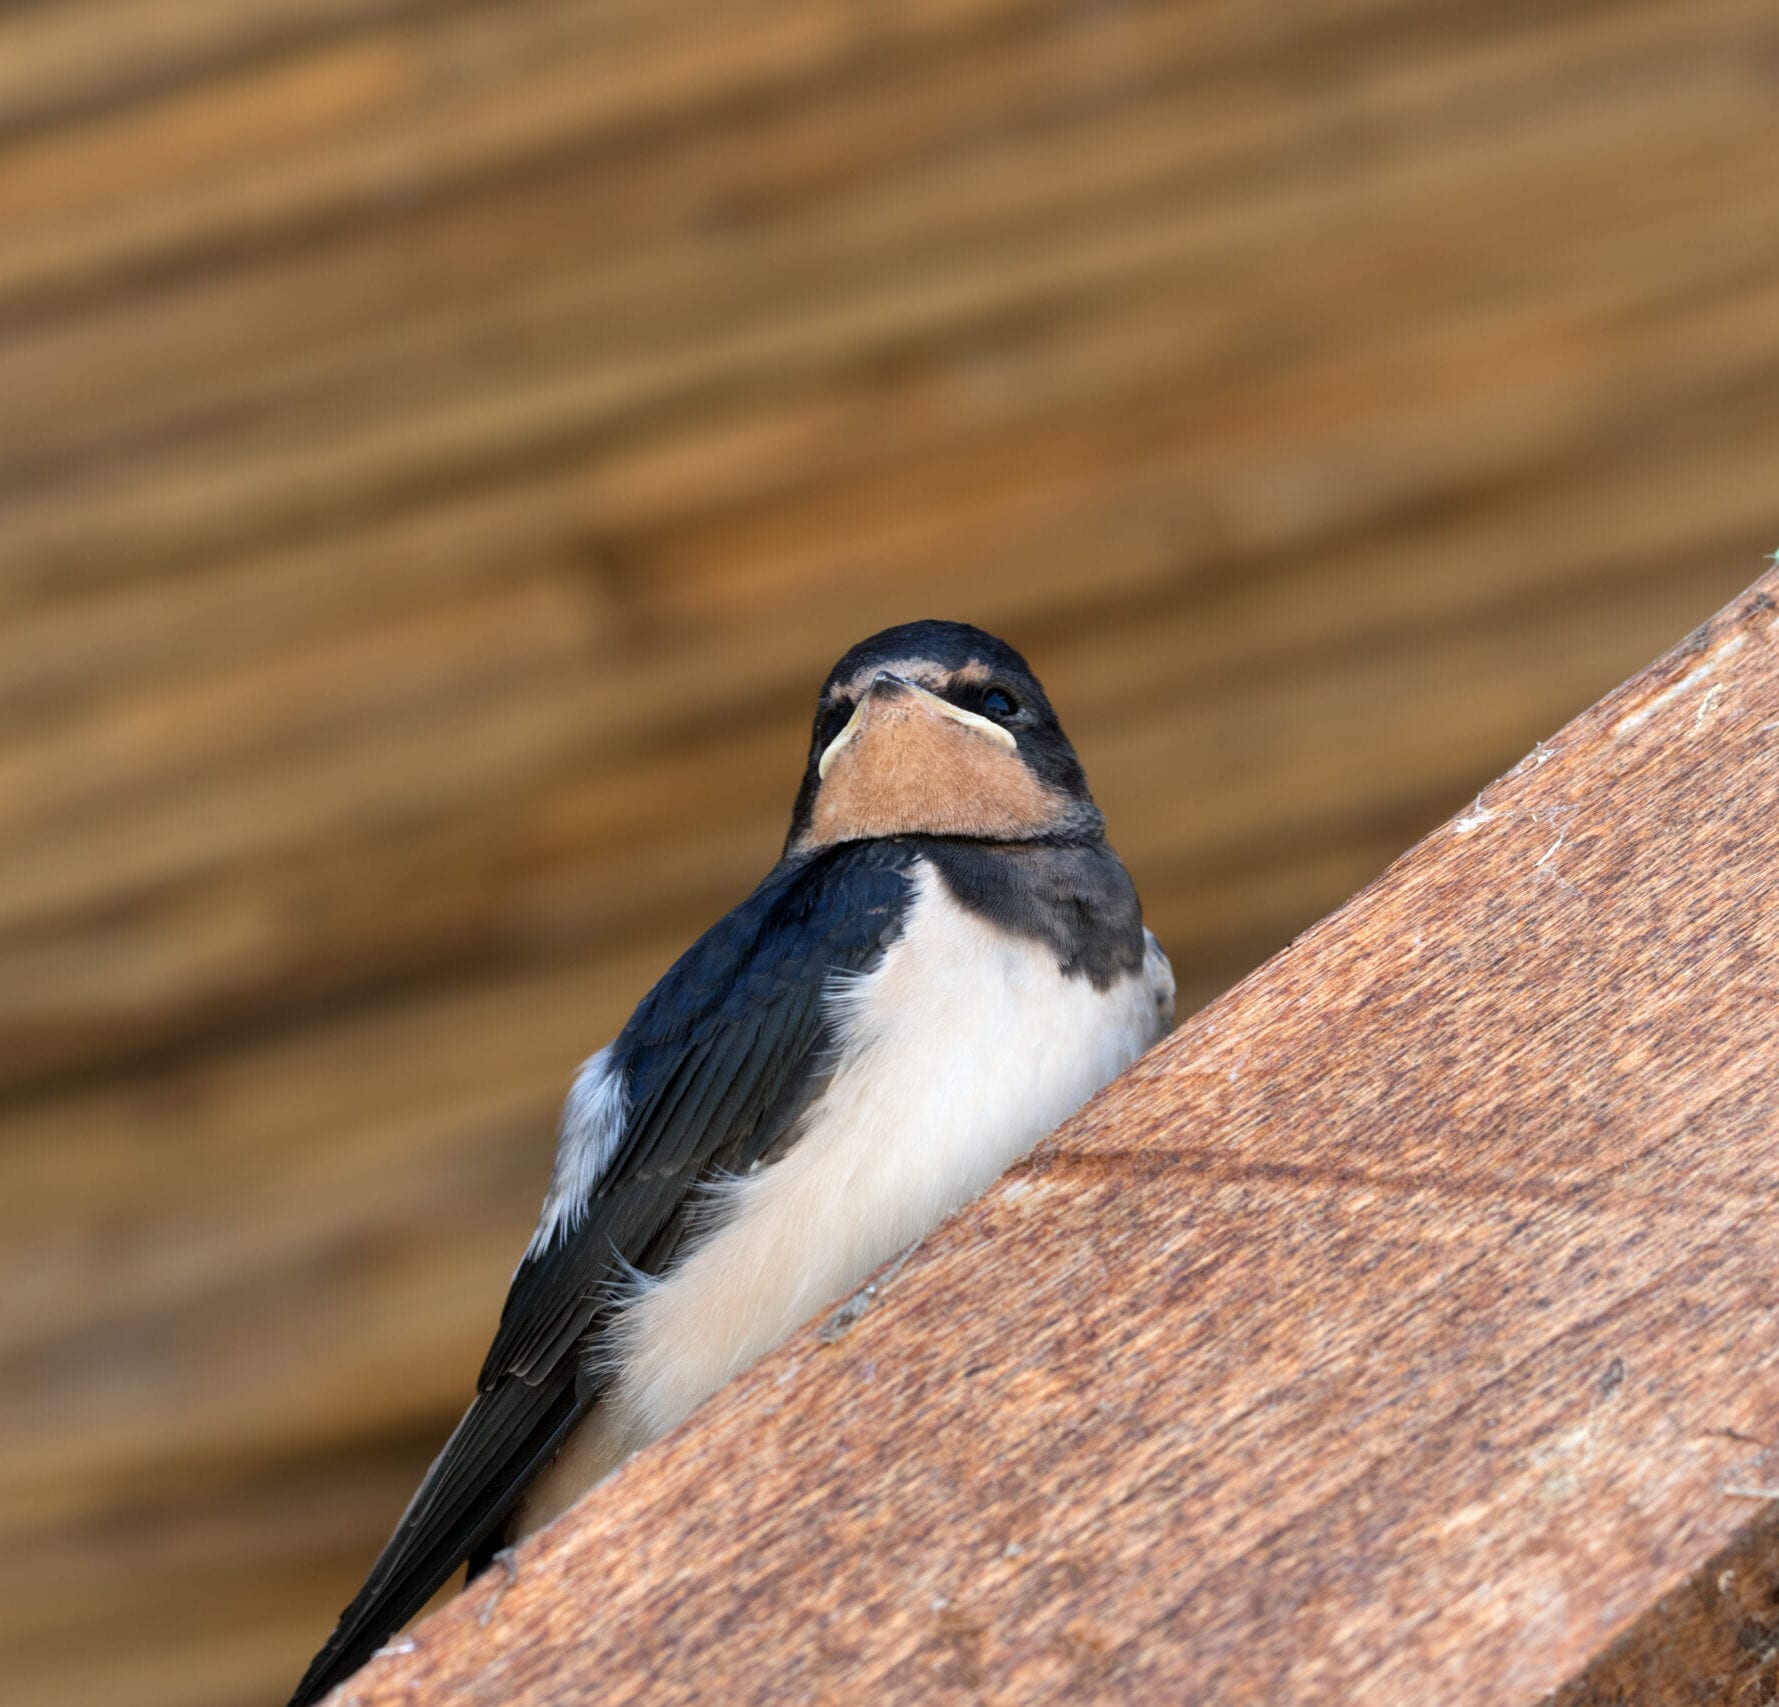 Baby bird of swallow sits on wooden beam under roof after nesting in the attic